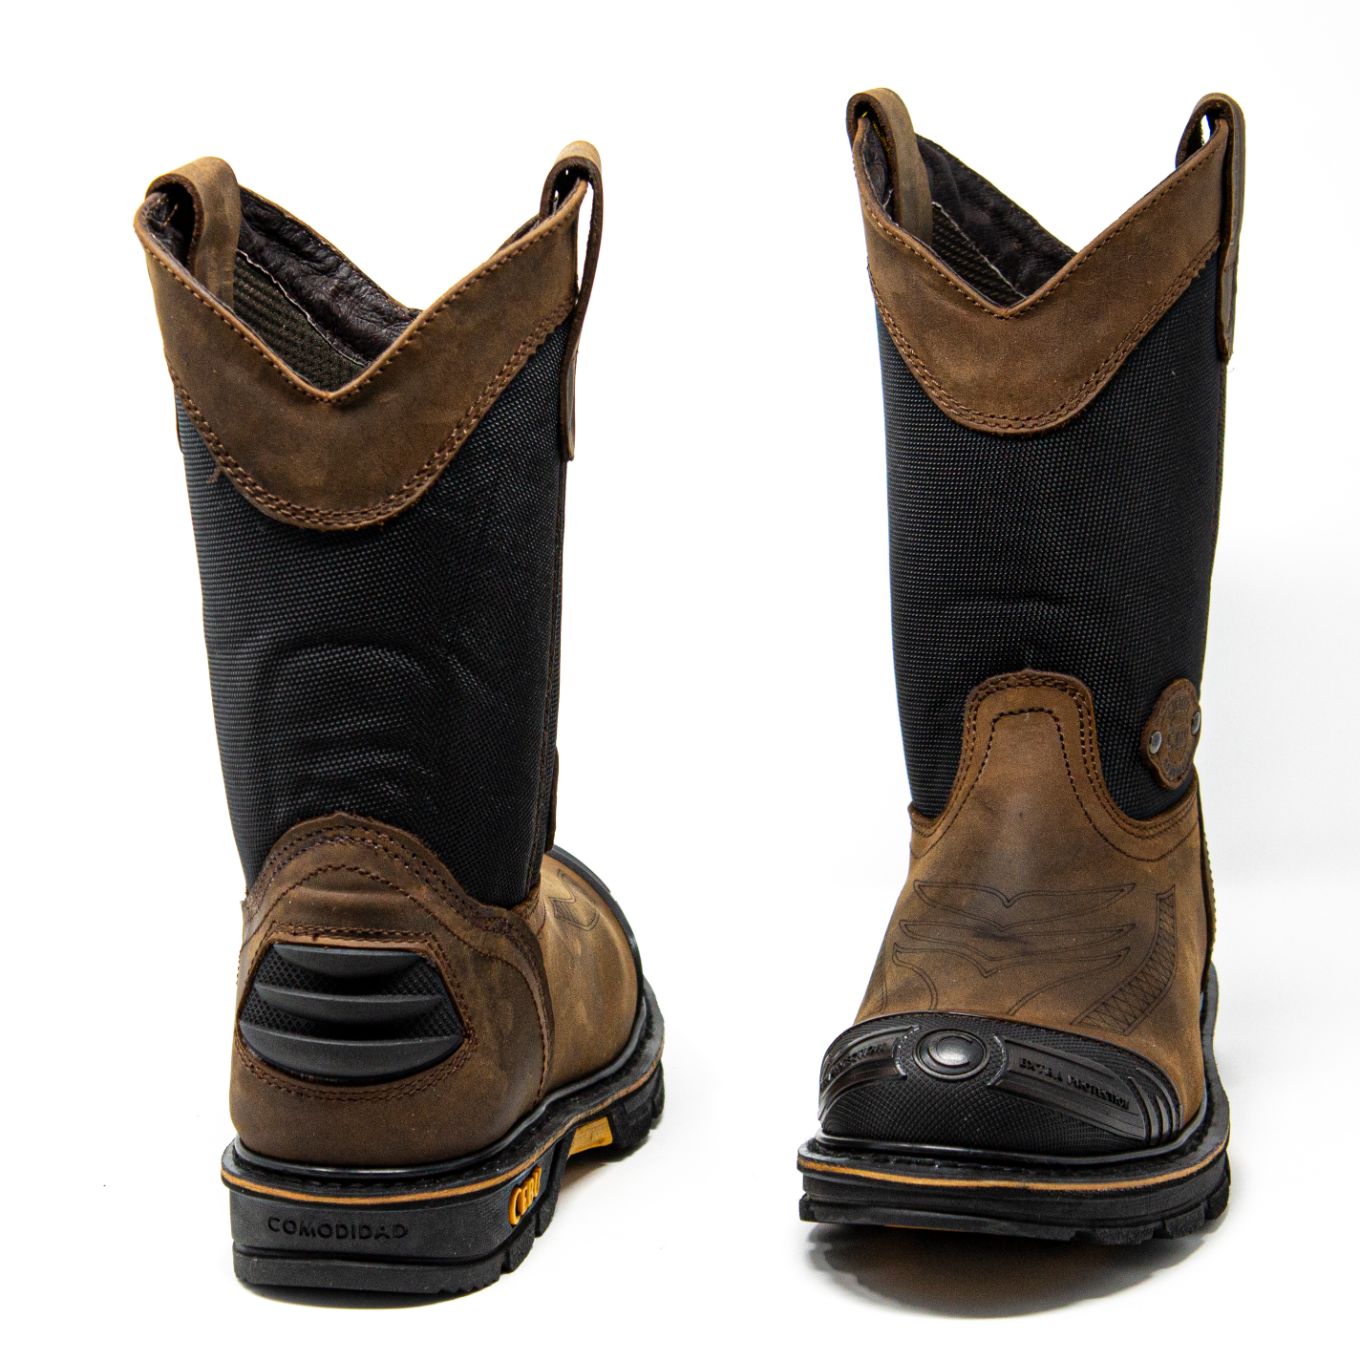 Men's Work Boots - Rubber Shield & Soft Toe - Brown Work Boots - Cebu - Pull On Work Boots - Cafe Wellington Work Boots